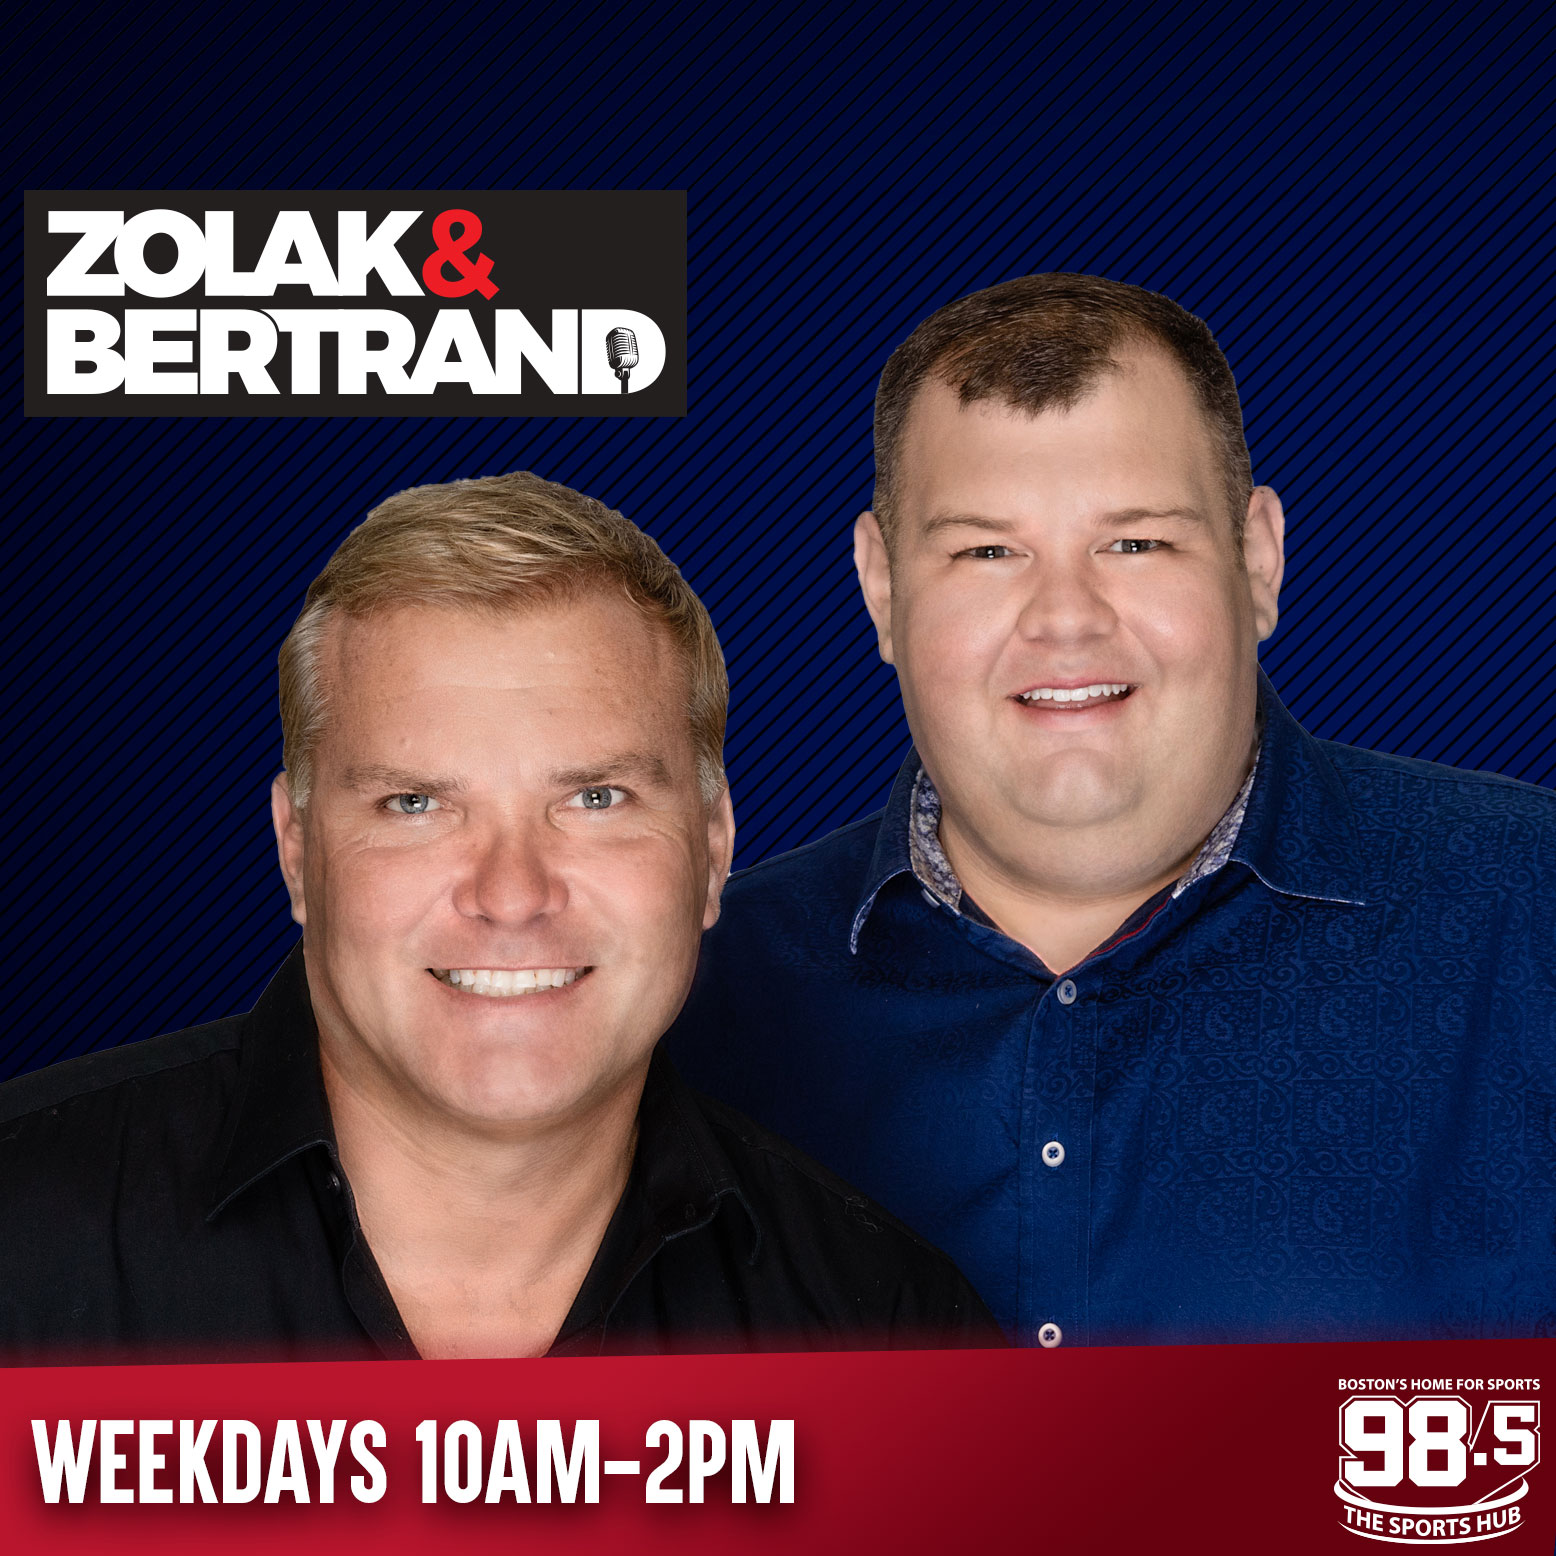 Zolak & Bertrand: Are the Patriots going to be boring again this year?